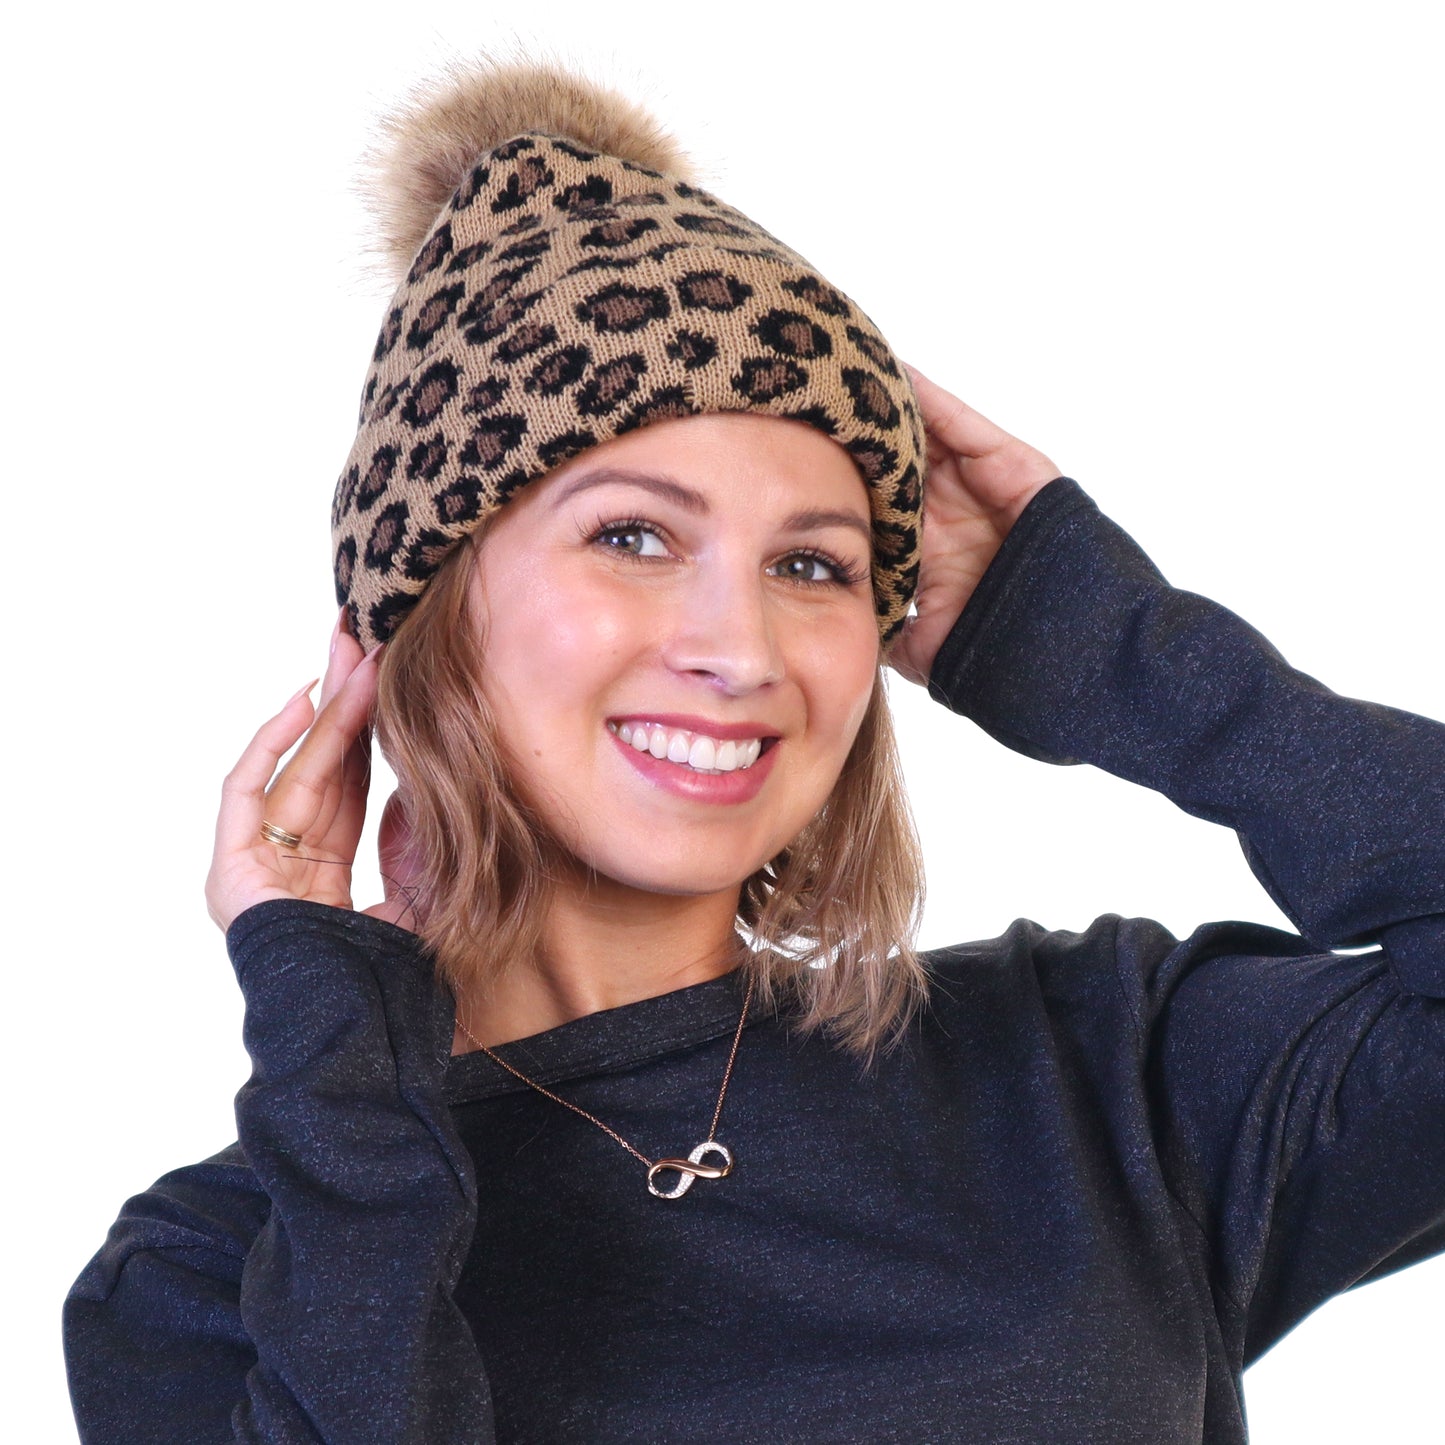 Angelina Women's Pom-Pom Knit Beanies with Leopard Print (3-Pack), #WH0077